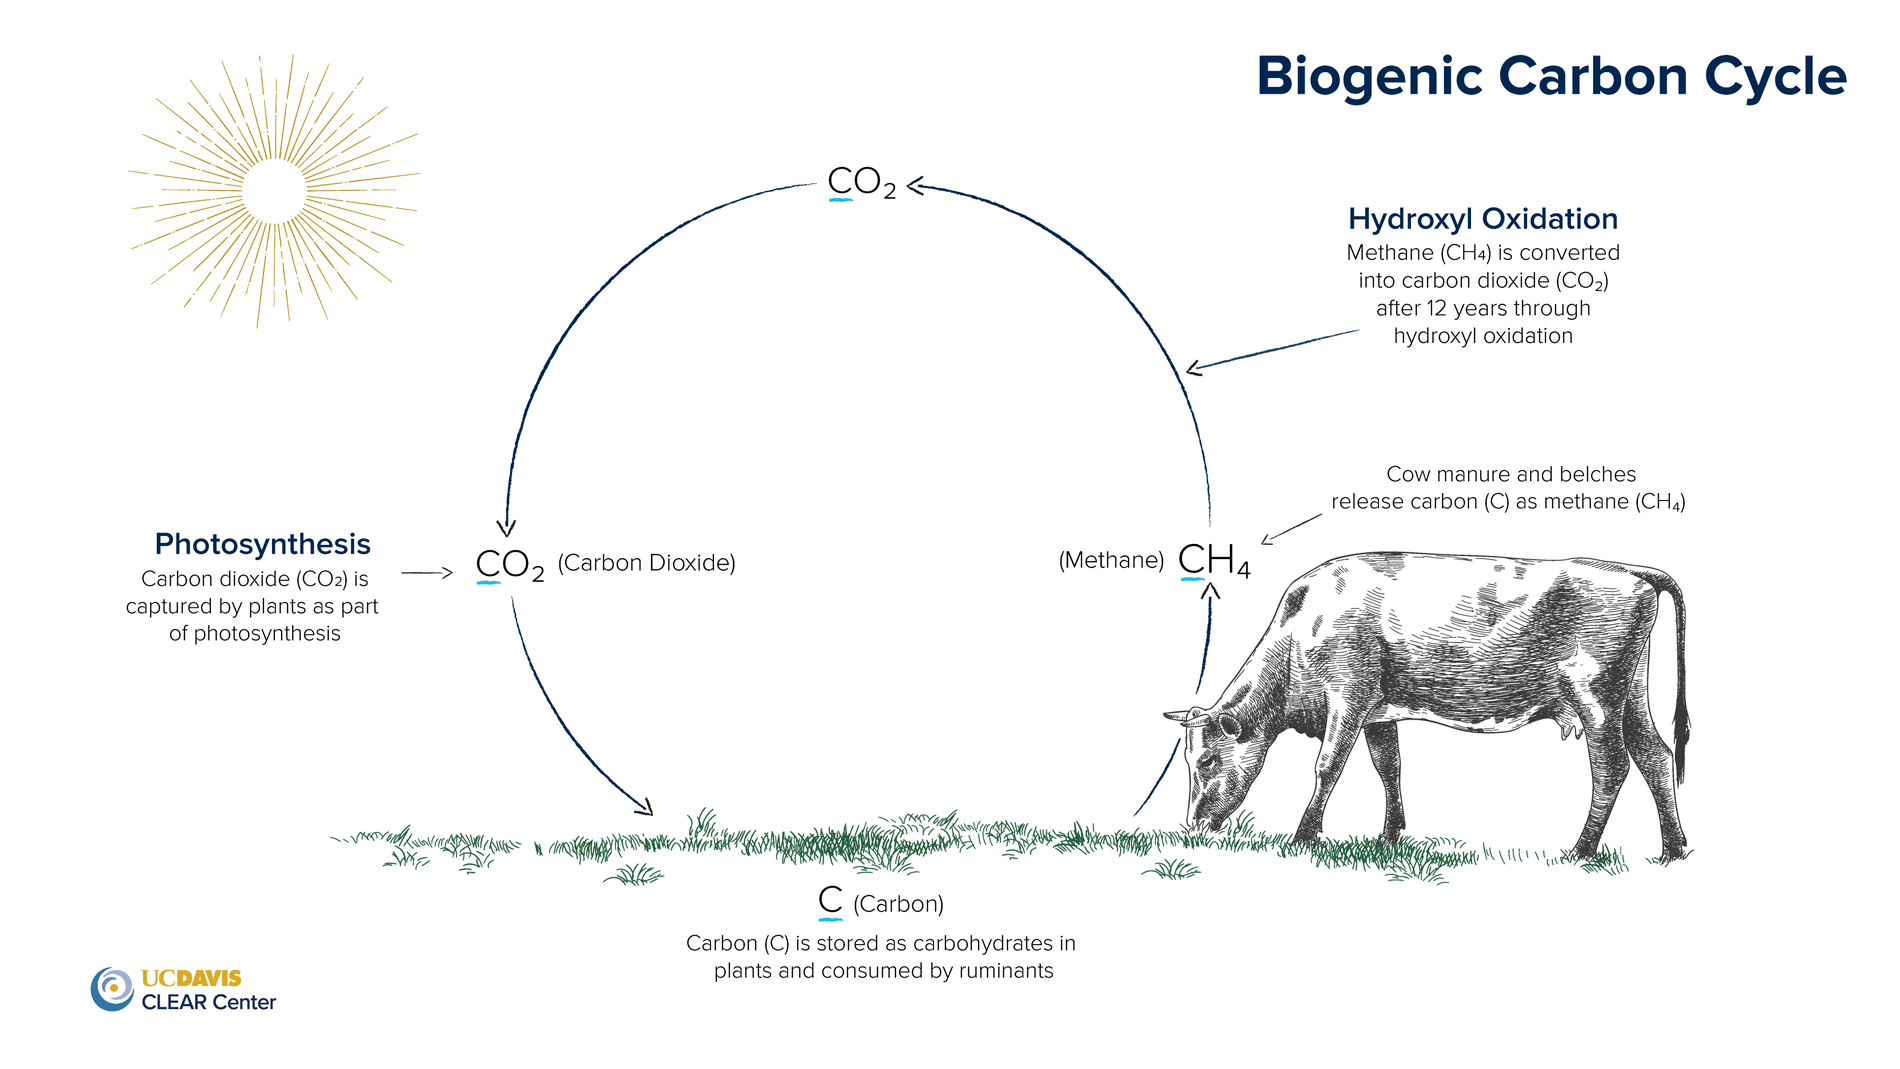 This photo depicts the biogenic carbon cycle